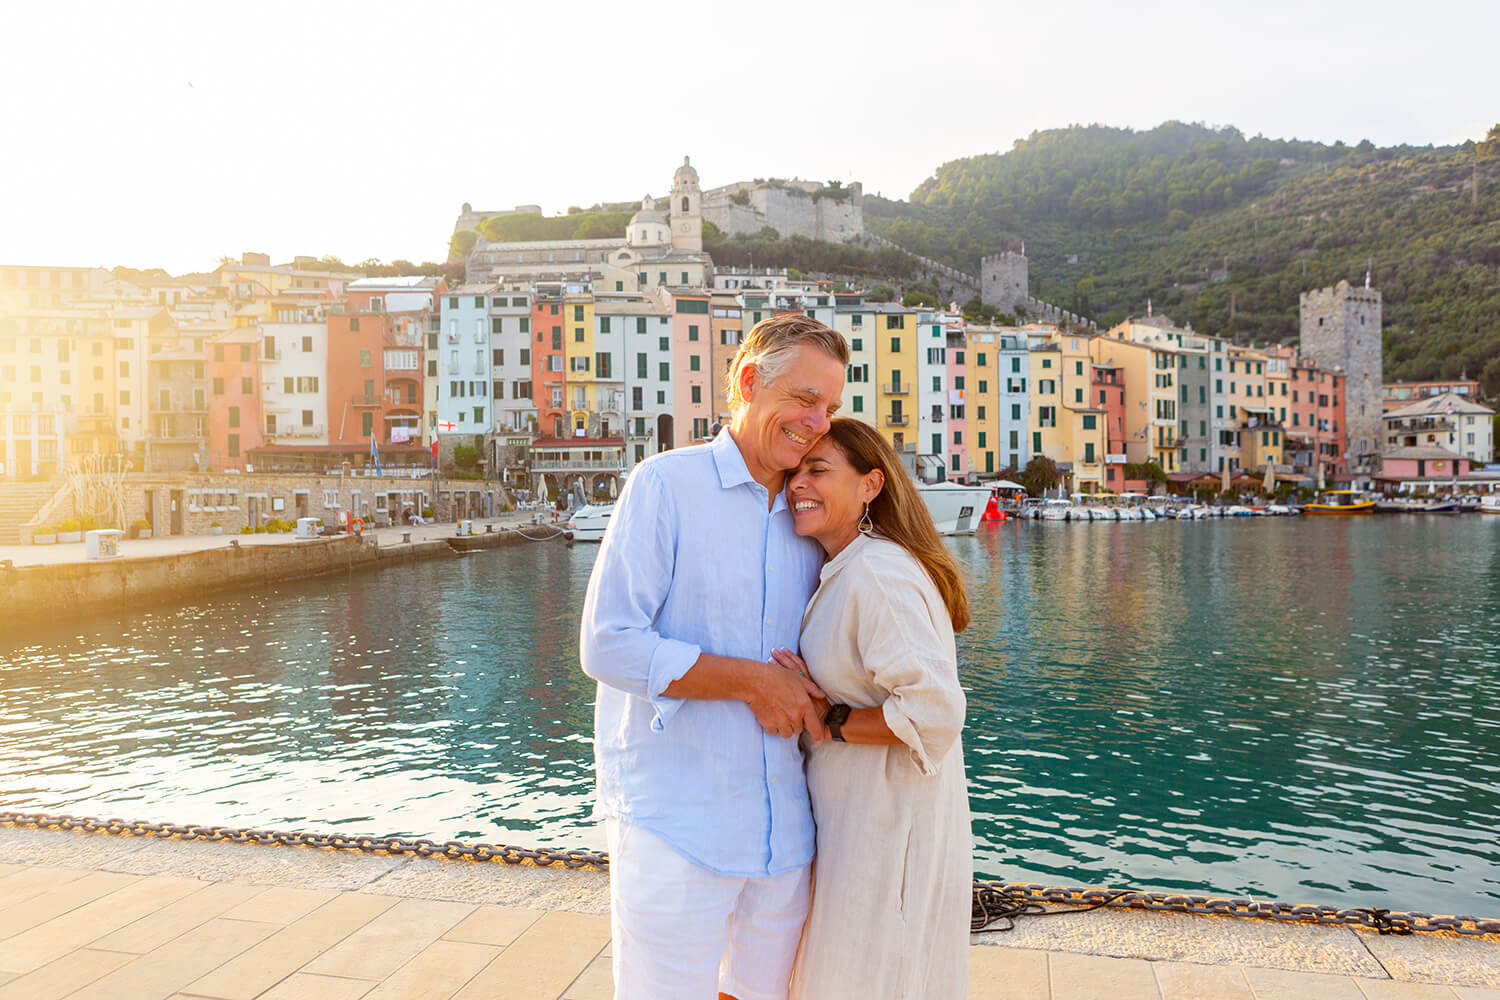 Happy couple in front of the colorful houses and sea in Portovenere, Italy